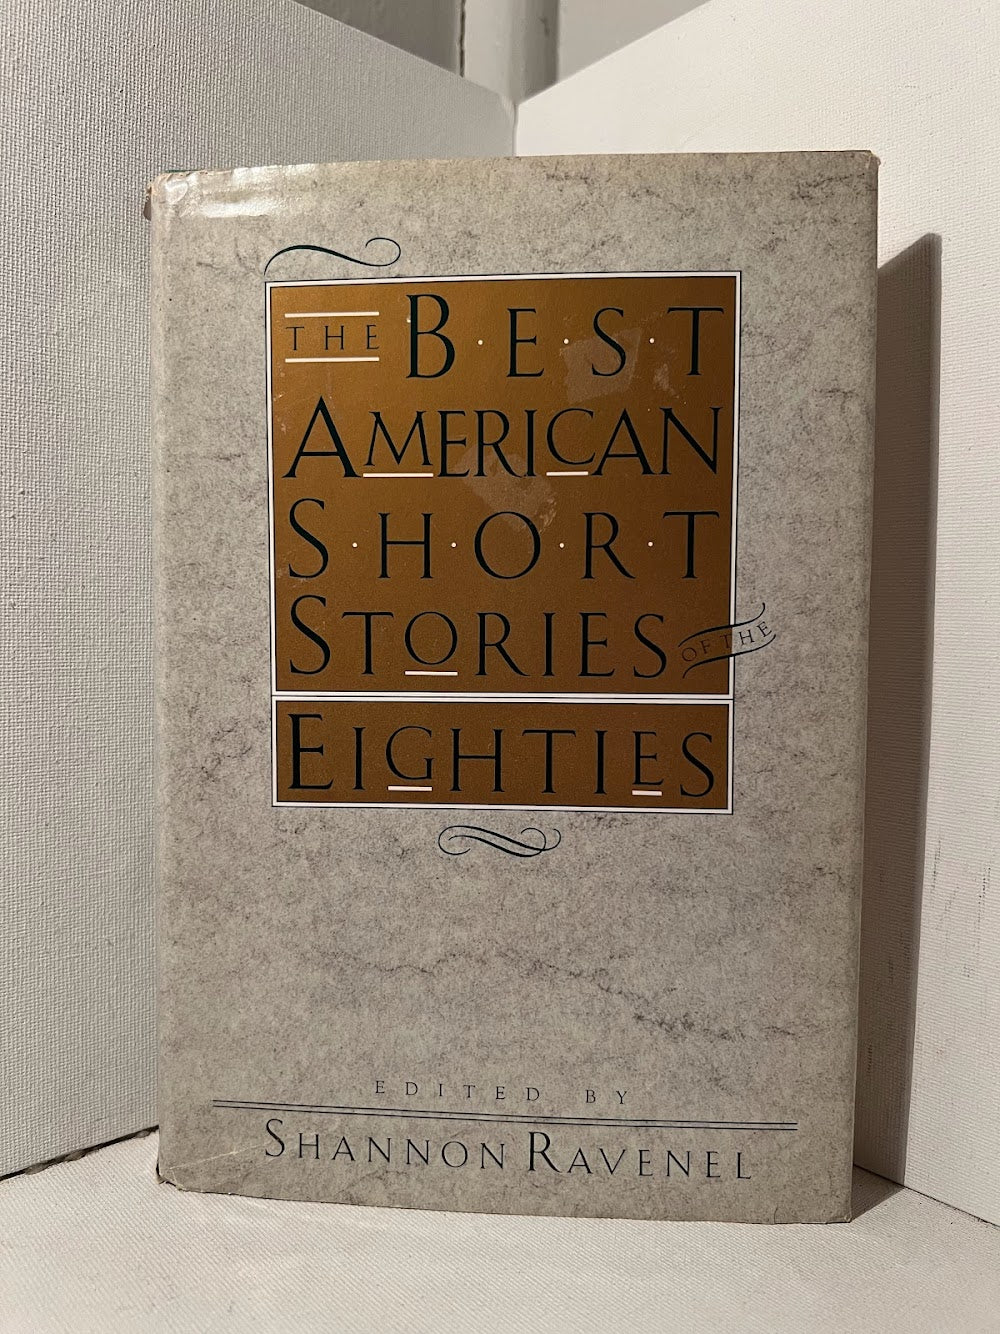 The Best American Short Stories of the Eighties edited by Shannon Ravenel